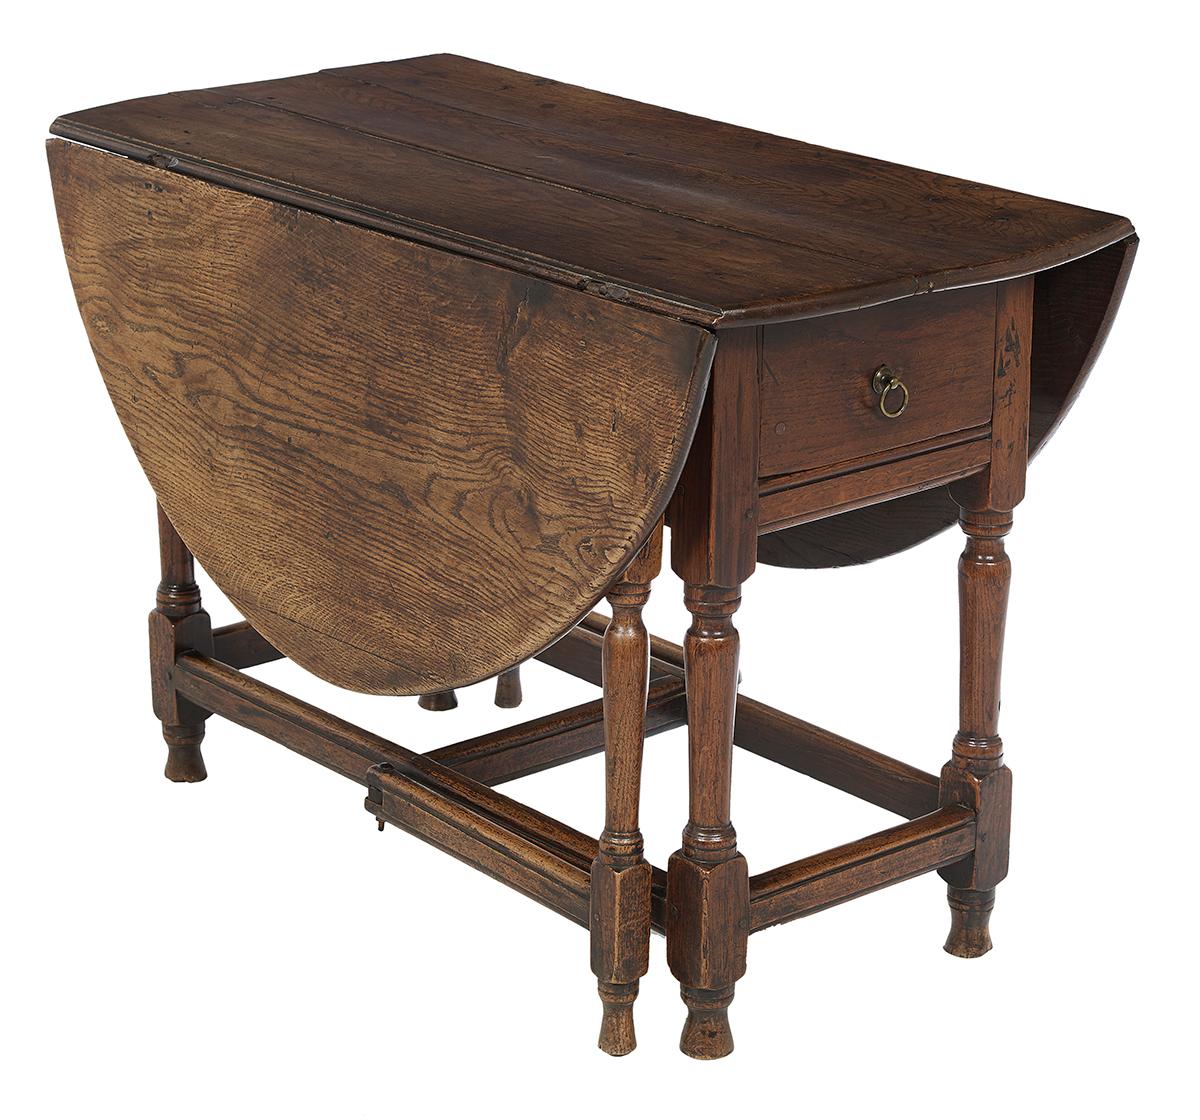 18th century English oak Gateleg table with drop leaves and one drawer.